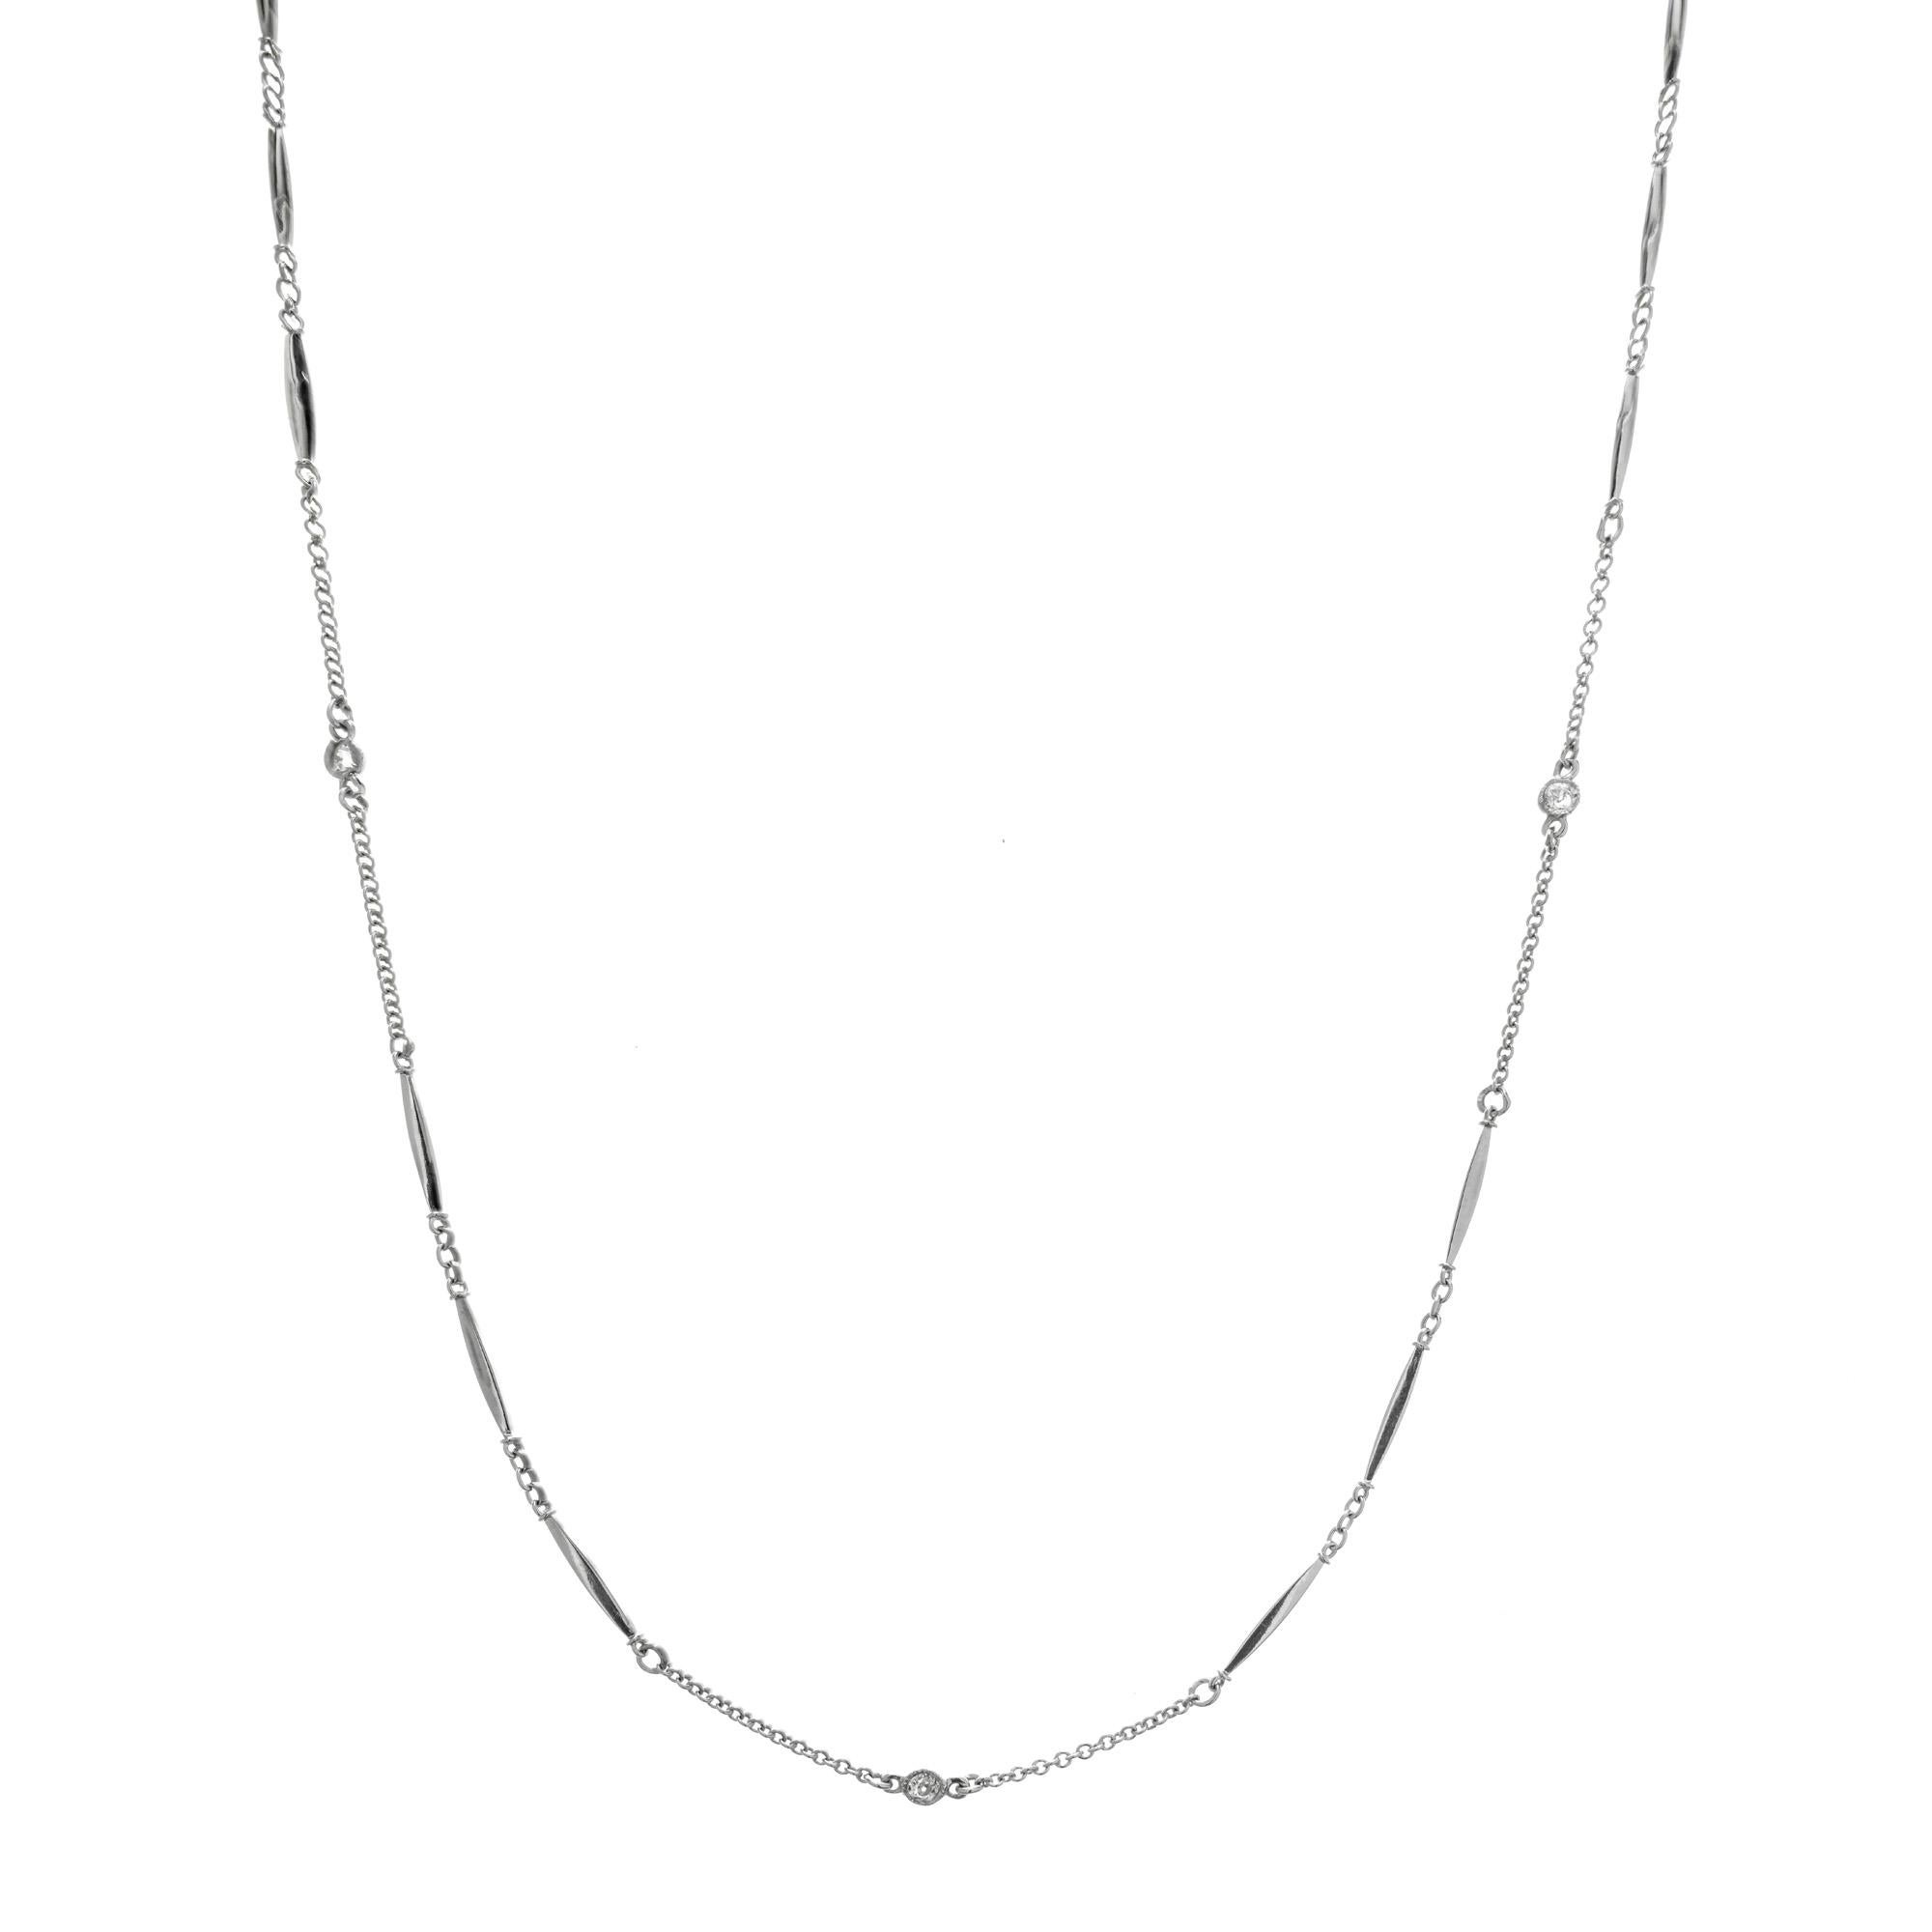 Unqiue Diamond link by the yard 20 inch Platinum bar link chain, circa 1930-1940. 
  
5 old mine brilliant cut diamonds, H SI approx. .15cts  SI    
Platinum
Tested: Platinum    
8.3 grams
Tubes: 3mm    
Chain: 1.2mm
Bars: 1.5mm wide   
Length: 20